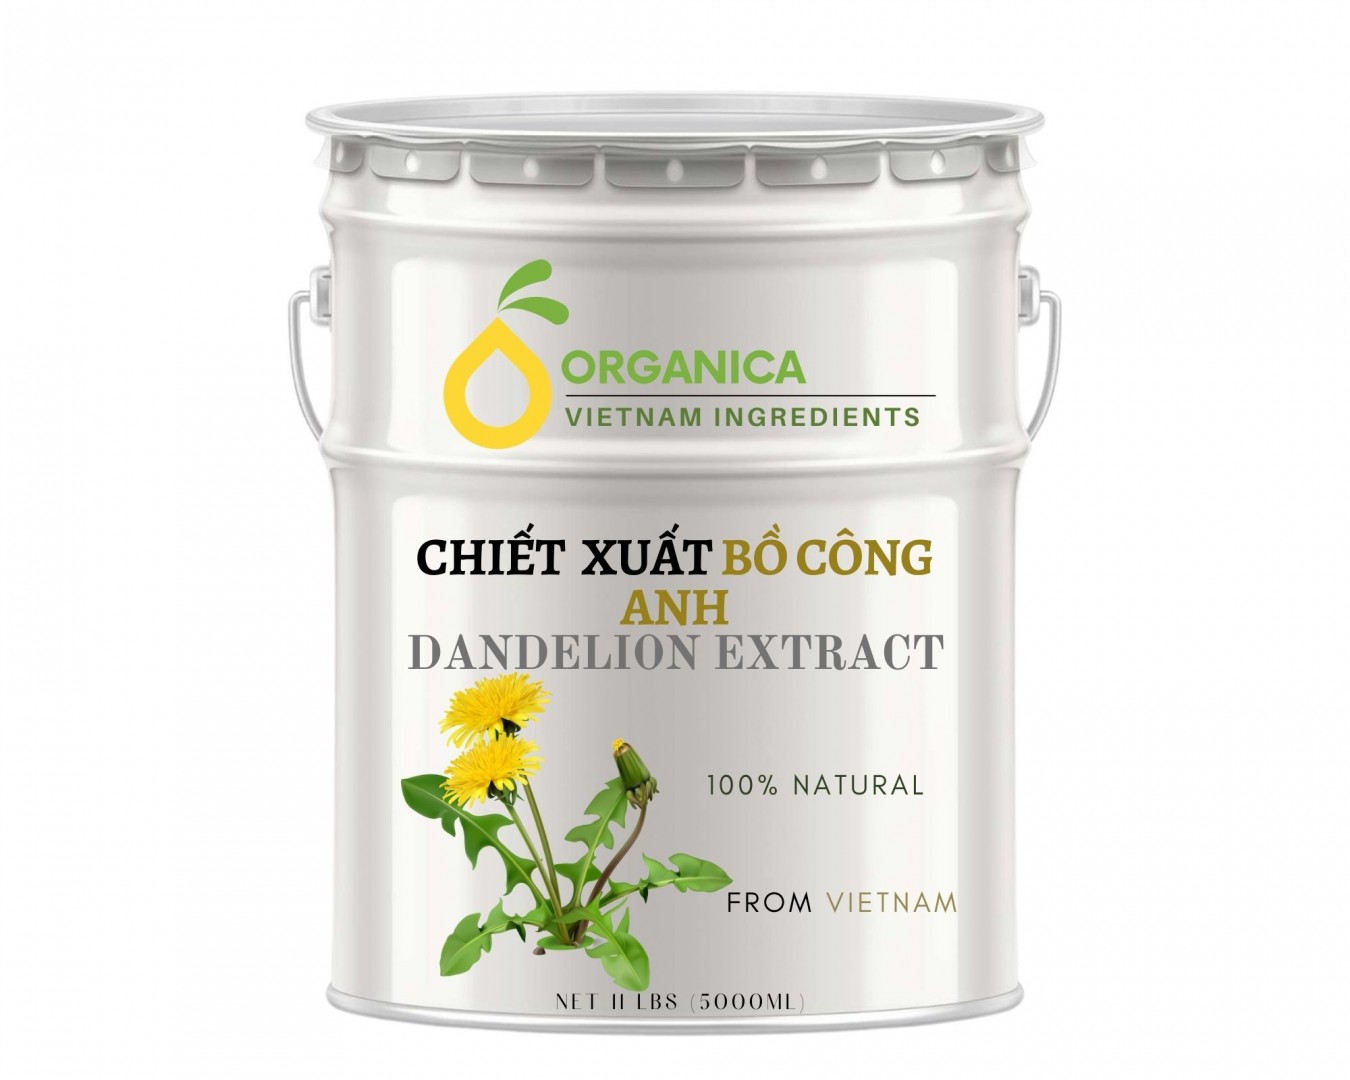 Chiết xuất bồ công anh (Dandelion extract)